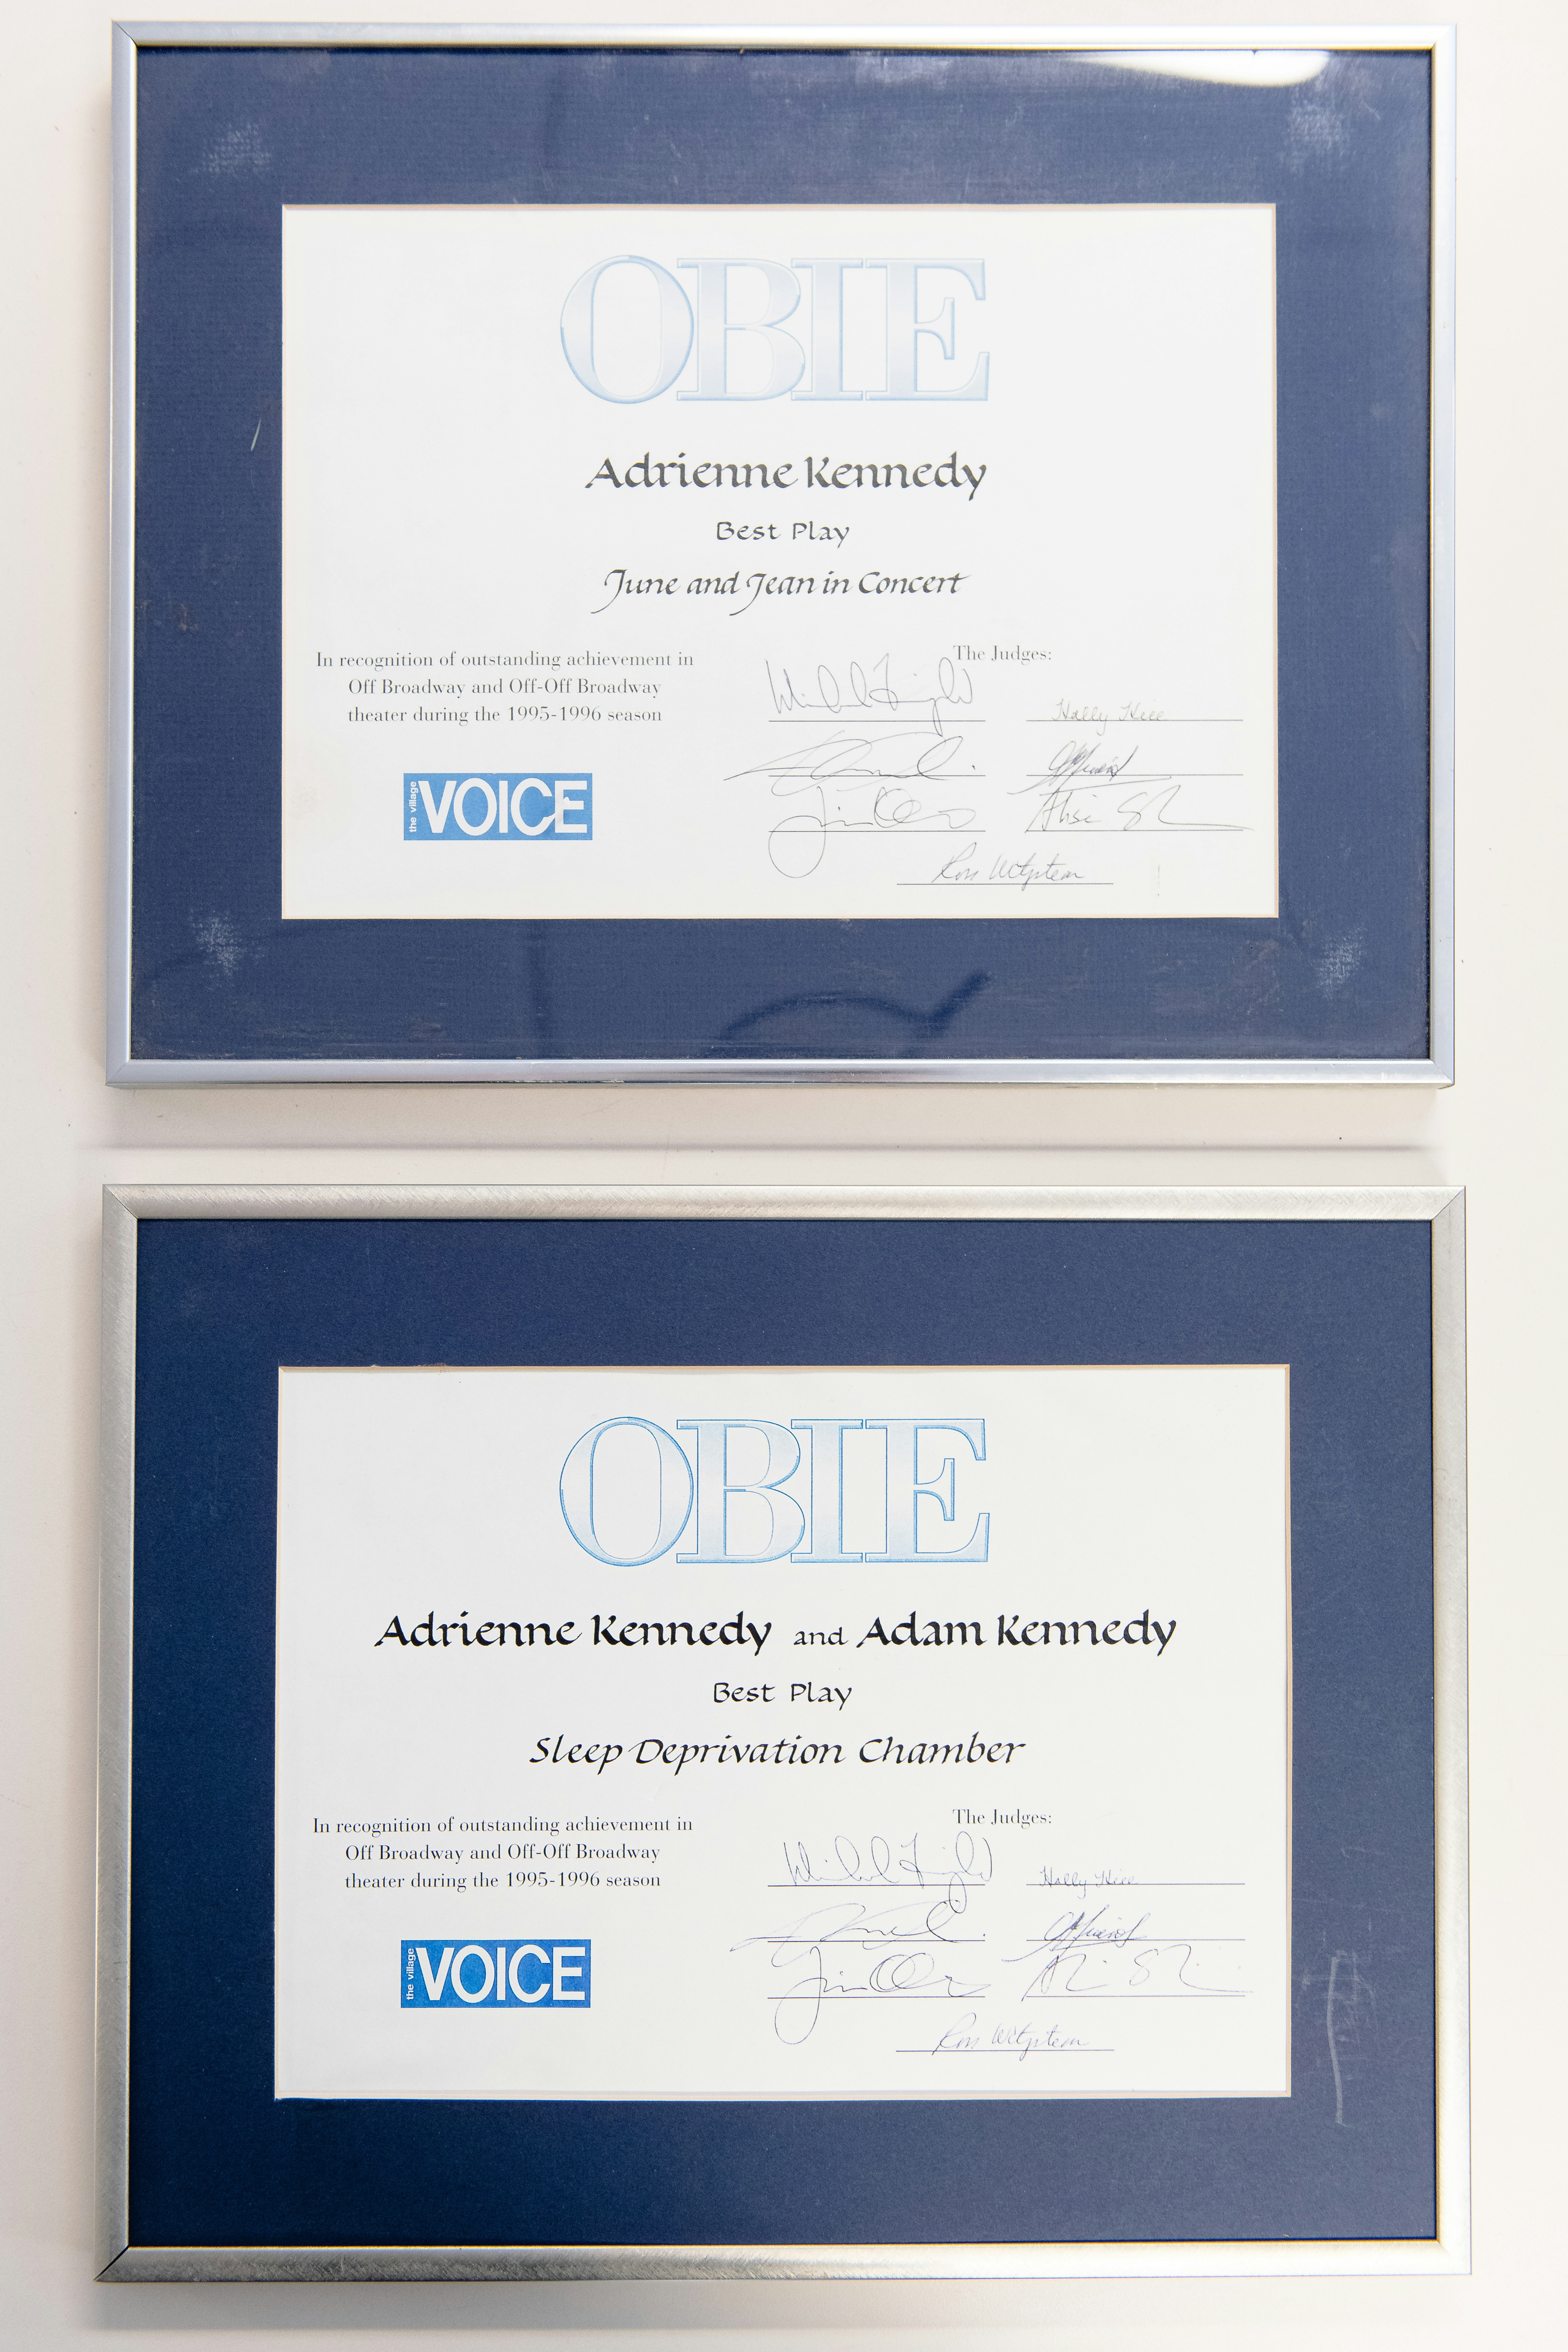 Two OBIE Awards from the Village Voice, each signed by seven judges. One is for June and Jean in Concert, and the other for Sleep Deprivation Chamber.